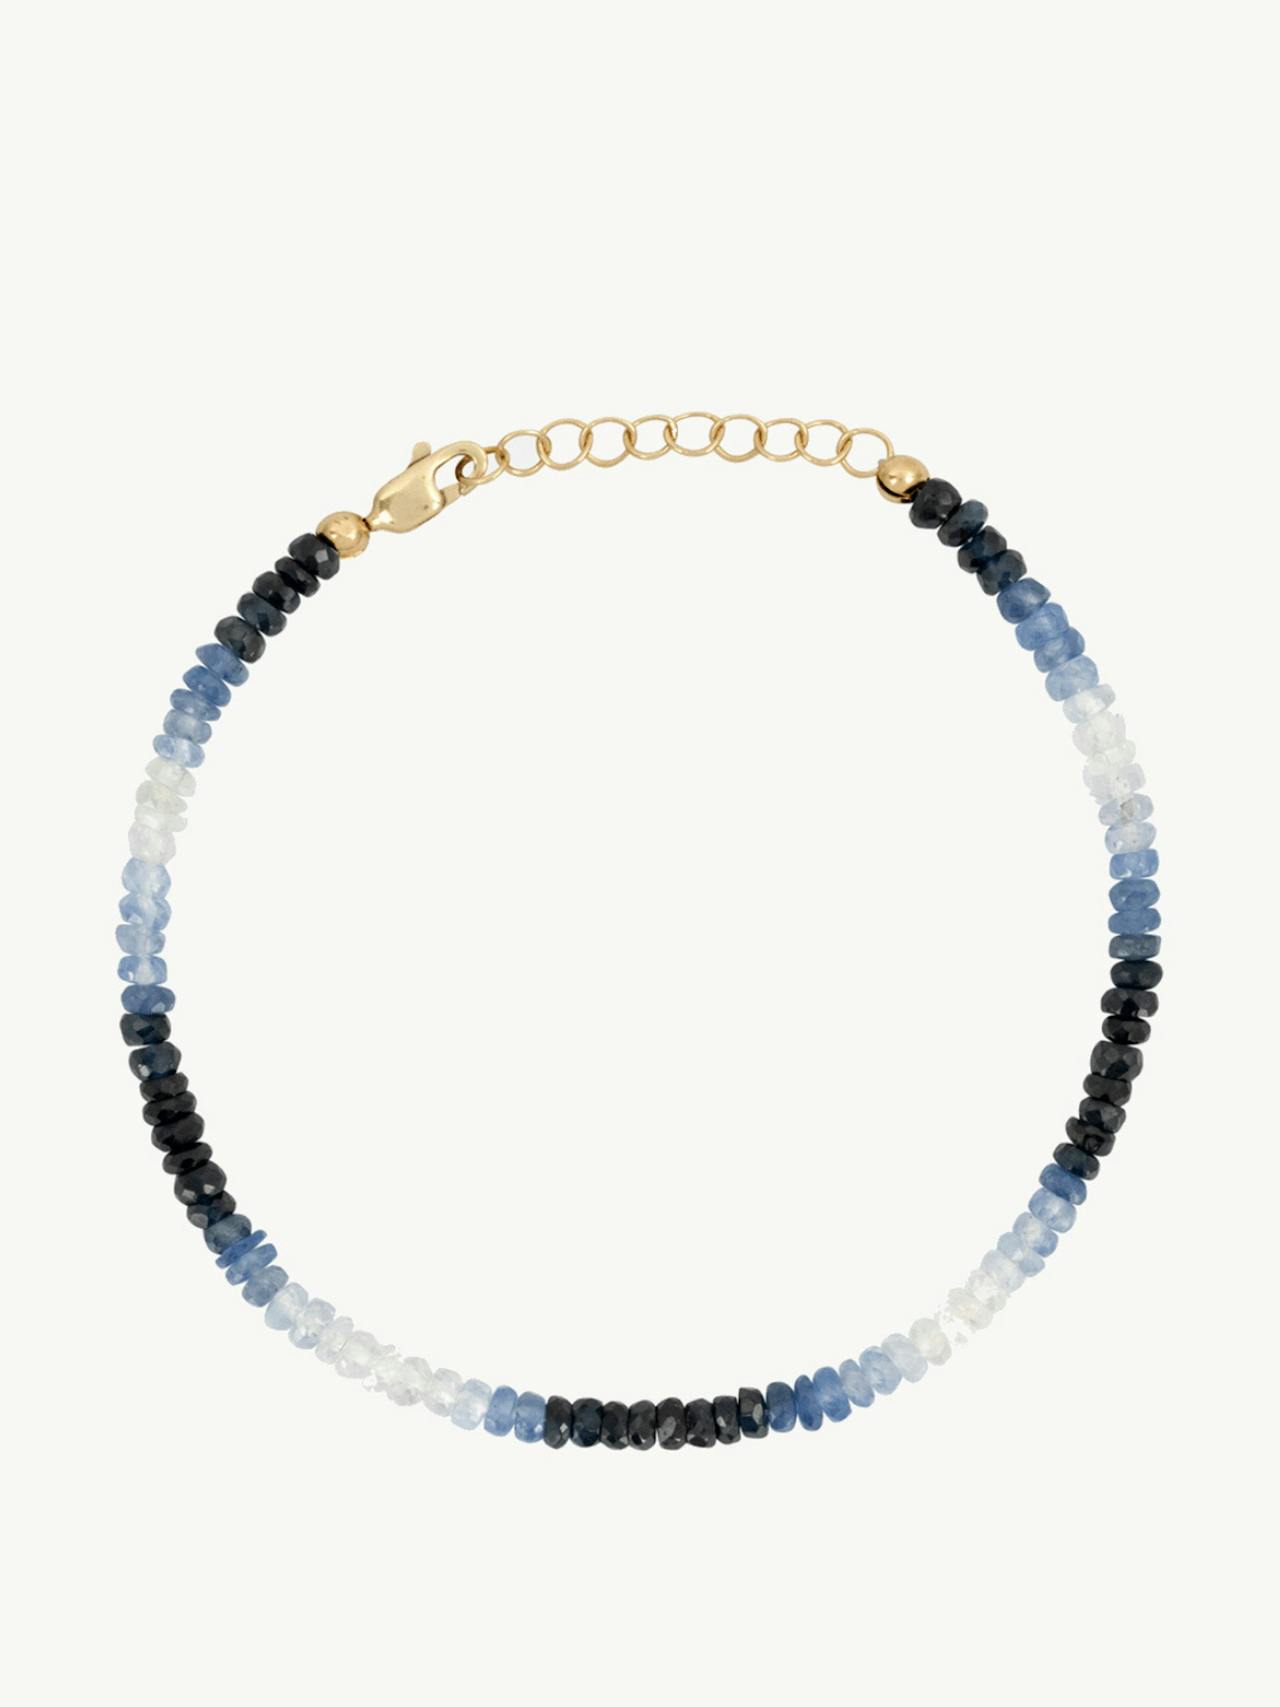 Graduated blue sapphire beaded anklet